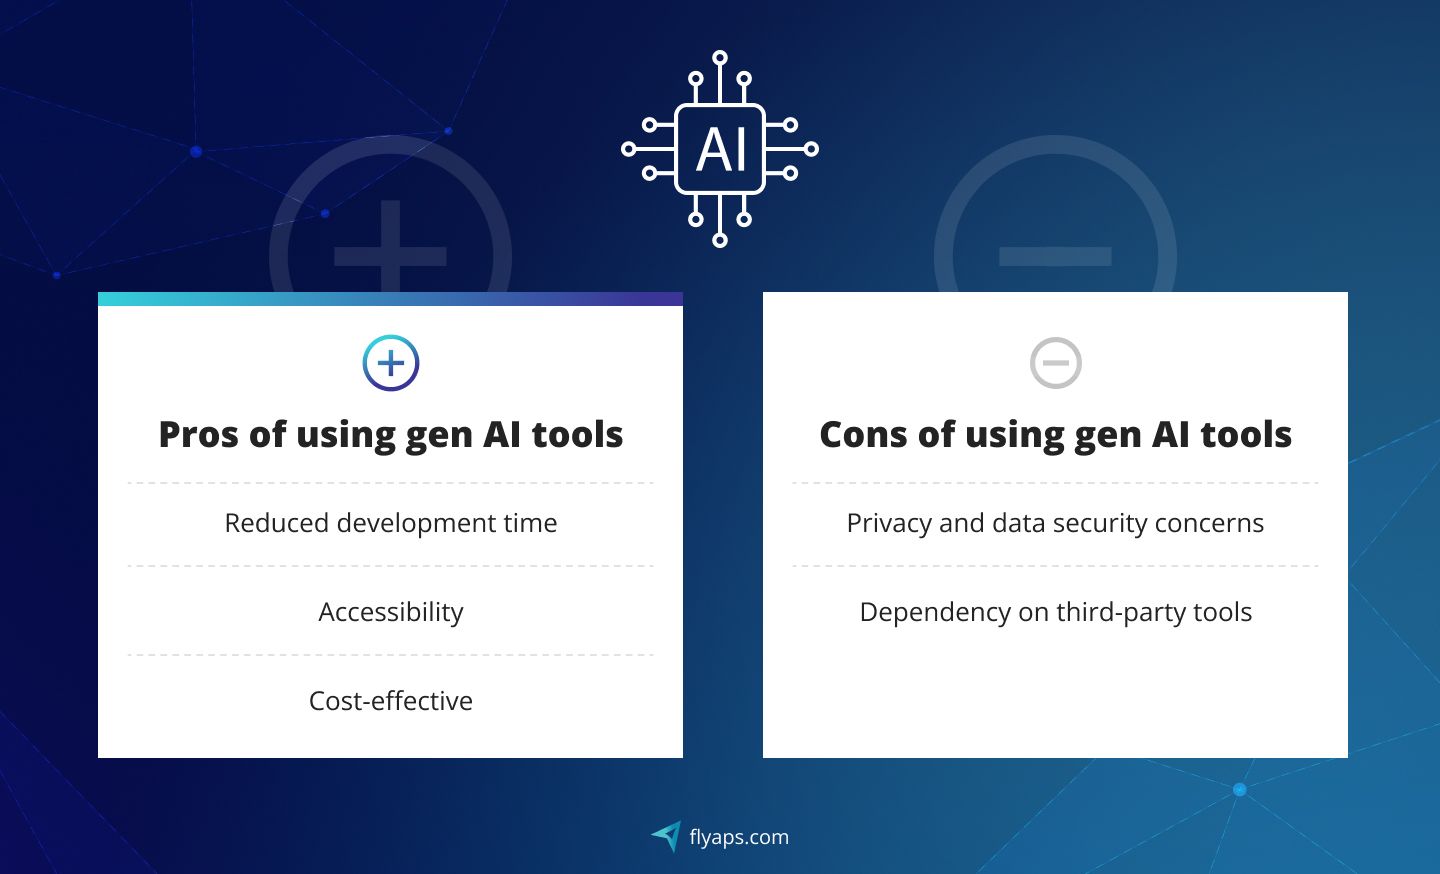 Pros and cons of using gen AI tools